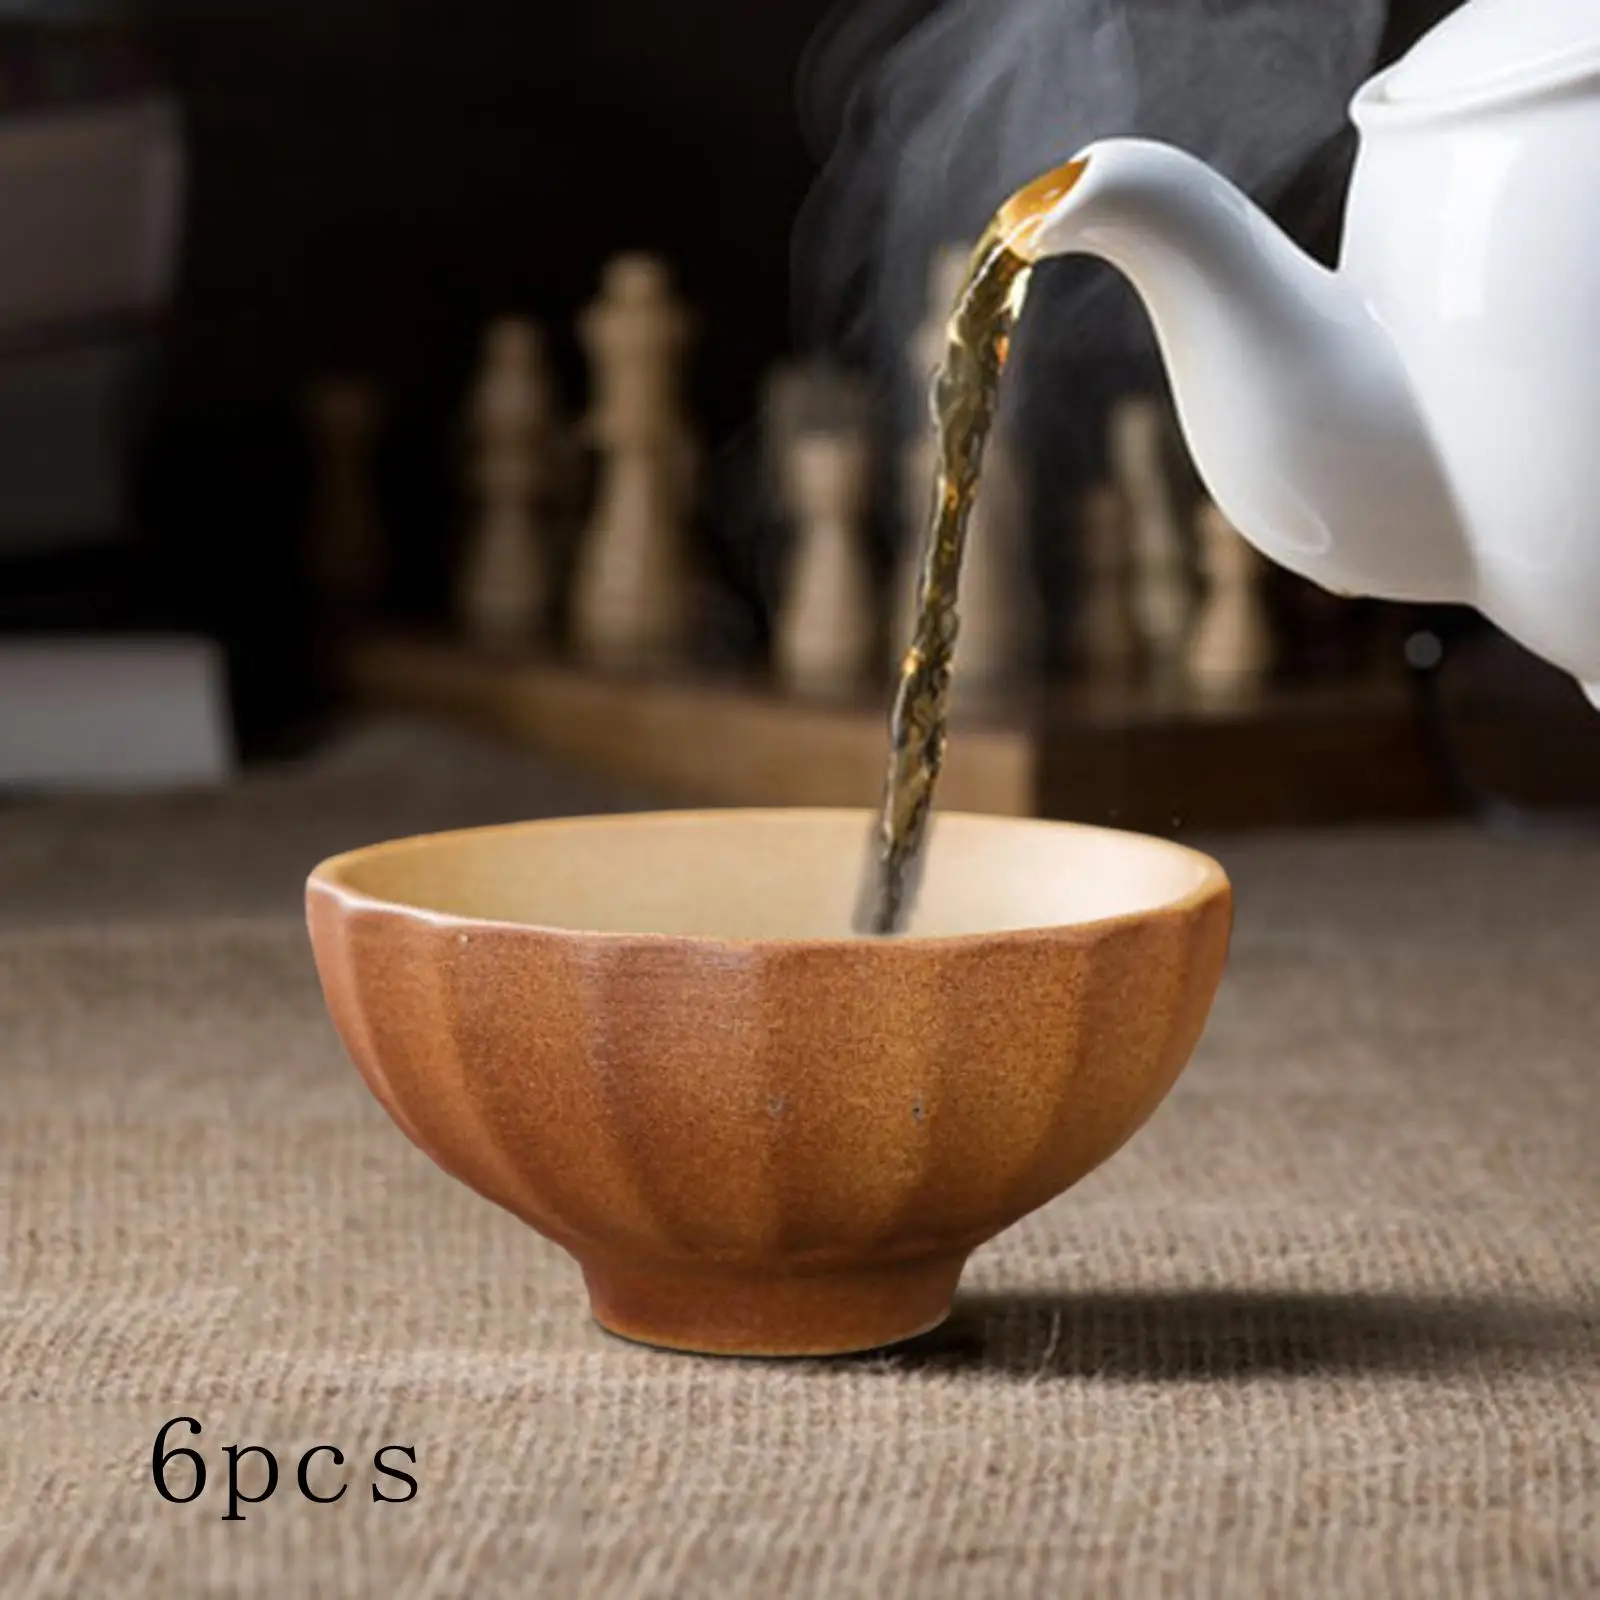 6 Pieces Teacup Set Kung Fu Cup Portable Multipurpose Mug Drinkware for Office Adults Men Women Hotel Home Tea Ceremony Party